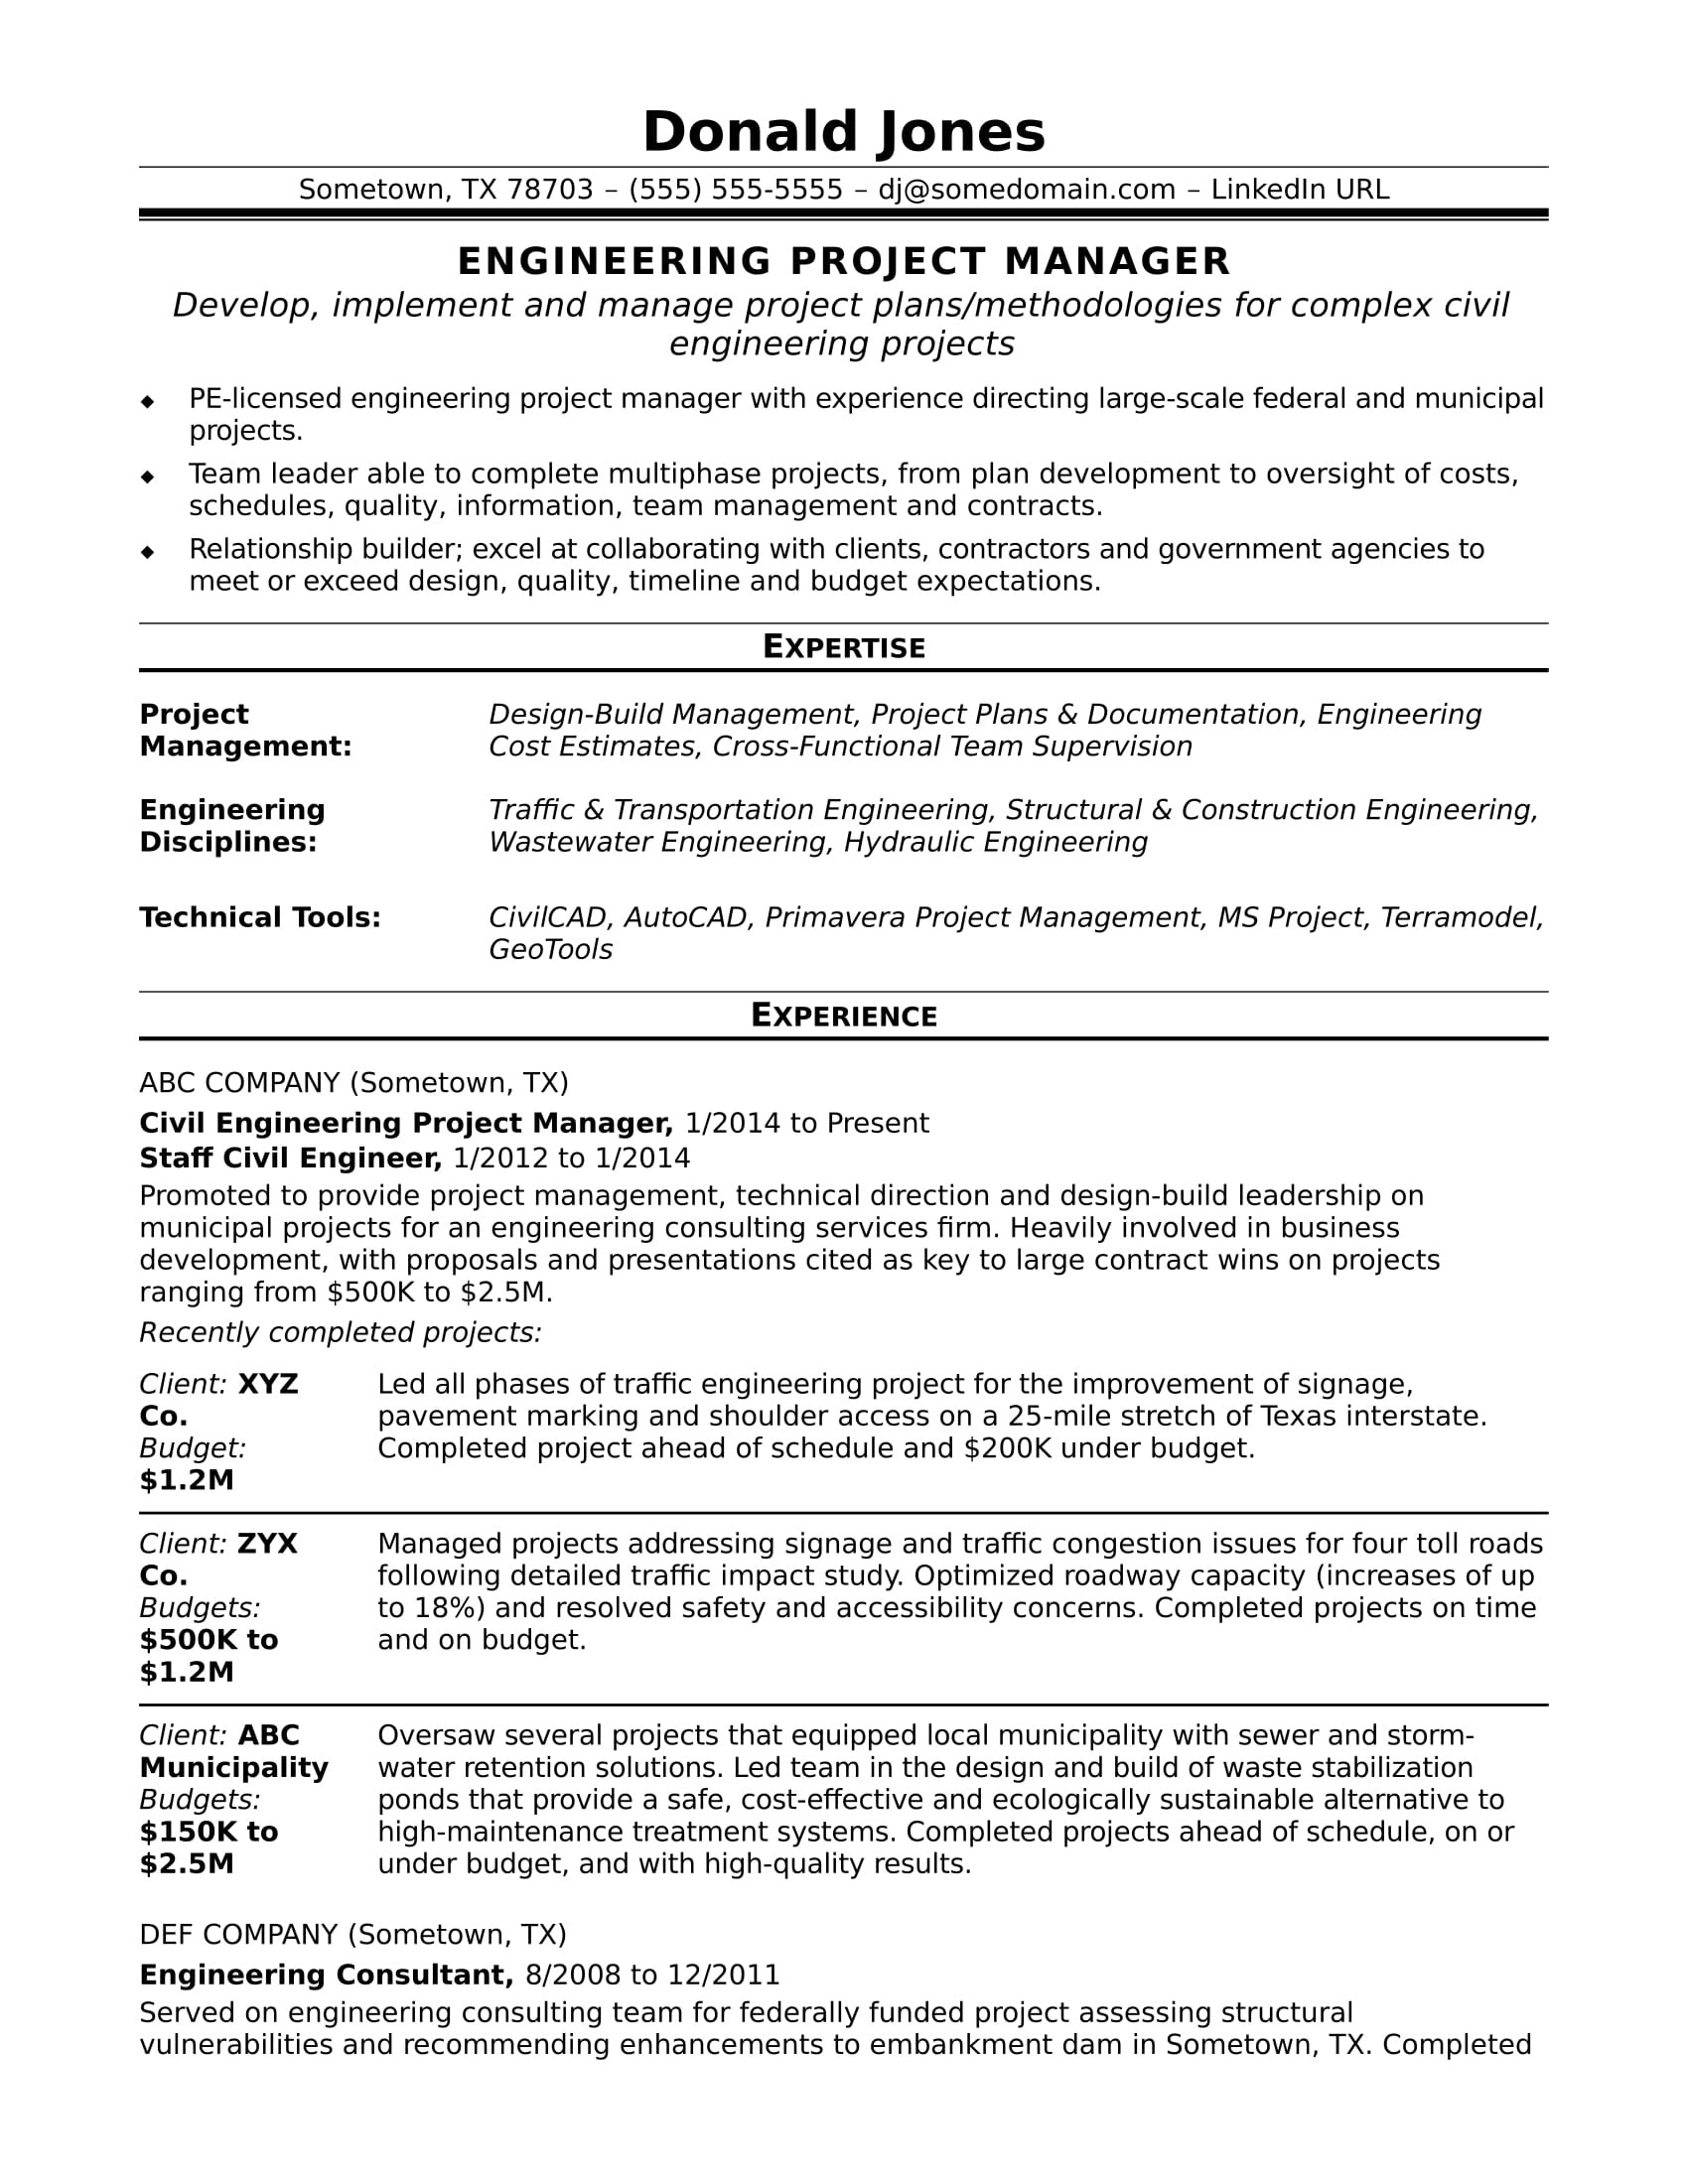 Sample Resume for Epc Project Manager Sample Resume for A Midlevel Engineering Project Manager Monster.com